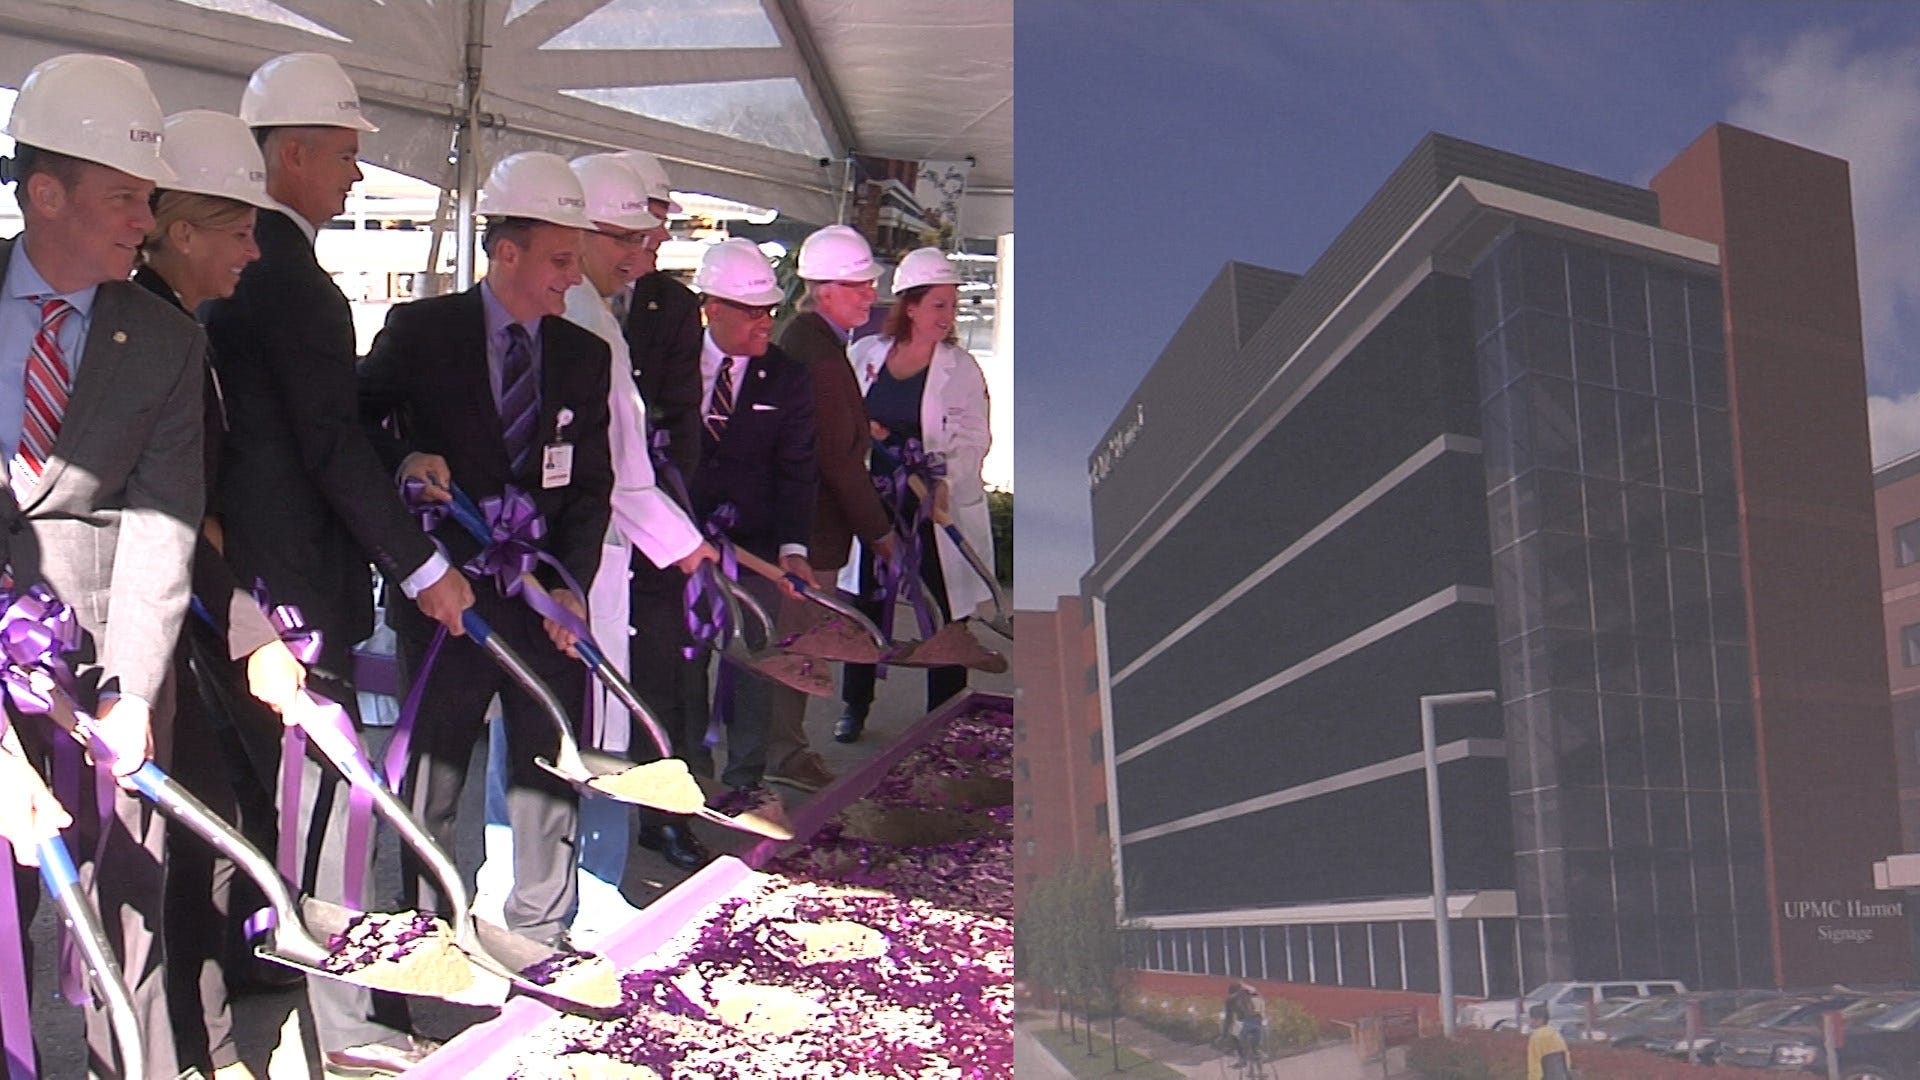 Construction Officially Begins On New Patient Tower At Upmc Hamo